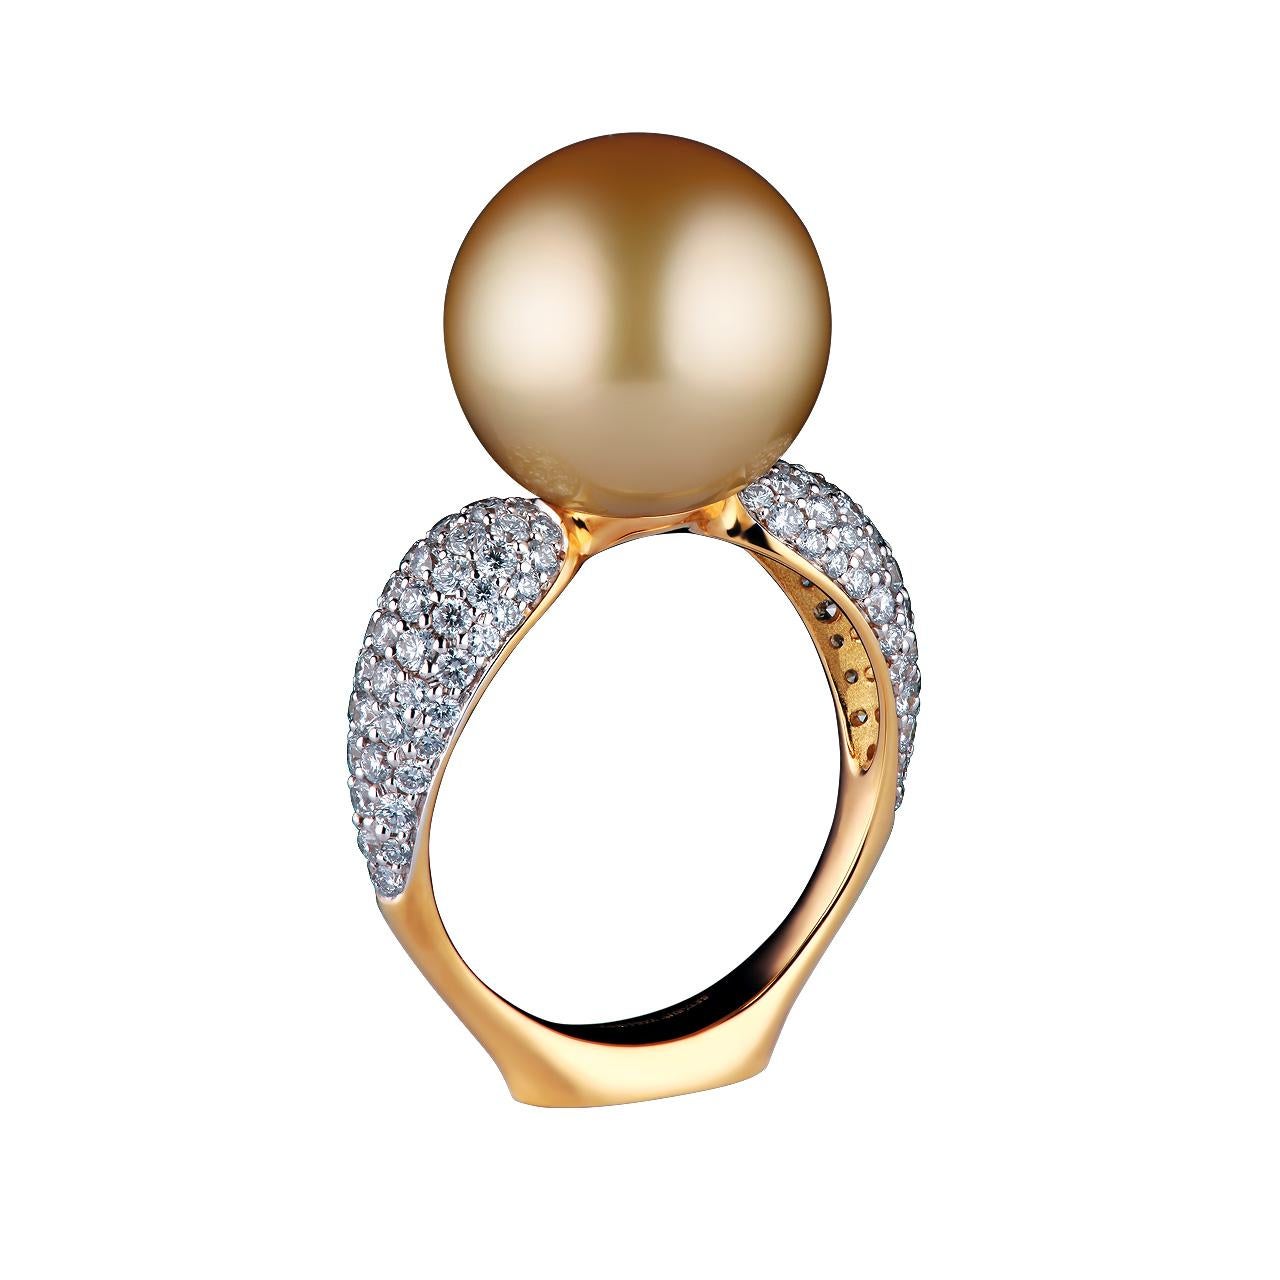 - 138 Round Diamonds - 1.05 ct, G/VVS1-VVS2
- 13 mm Golden South Sea pearl
- 18K Yellow Gold 
- Weight: 7.31 g
- Size: 16 mm
This fabulous ring with the beautiful lustrous Golden South Sea Pearl with diamond pave setting is made of 18K Yellow Gold.